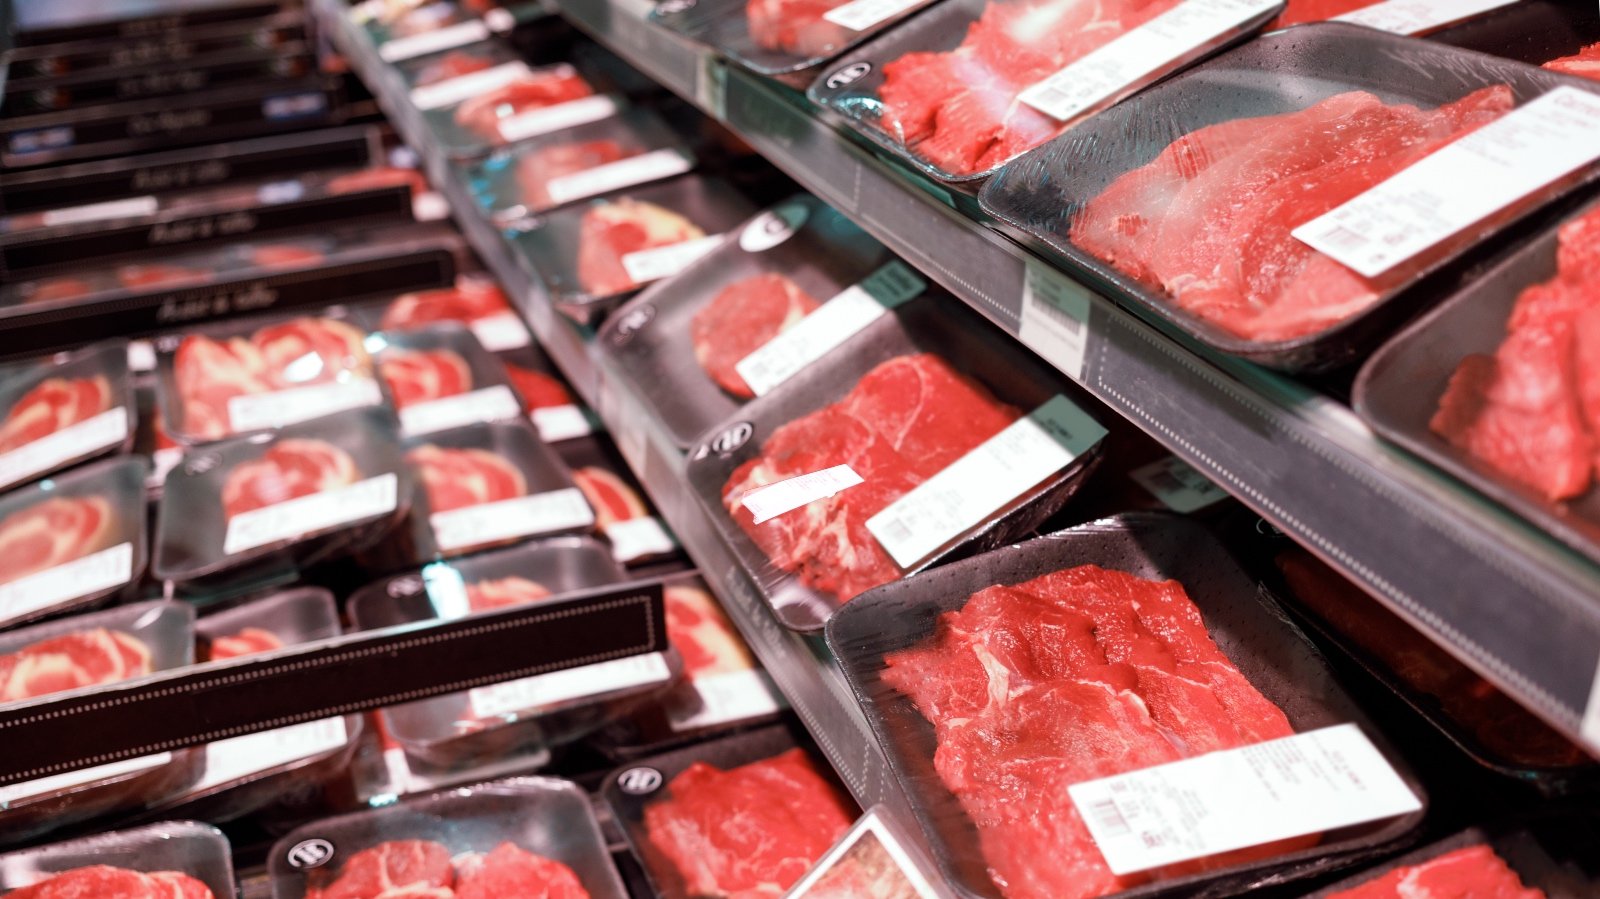 UK Government Urged To Reconsider Meat Tax After No. 10 Official Declares: 'It's Not Going To Happen'